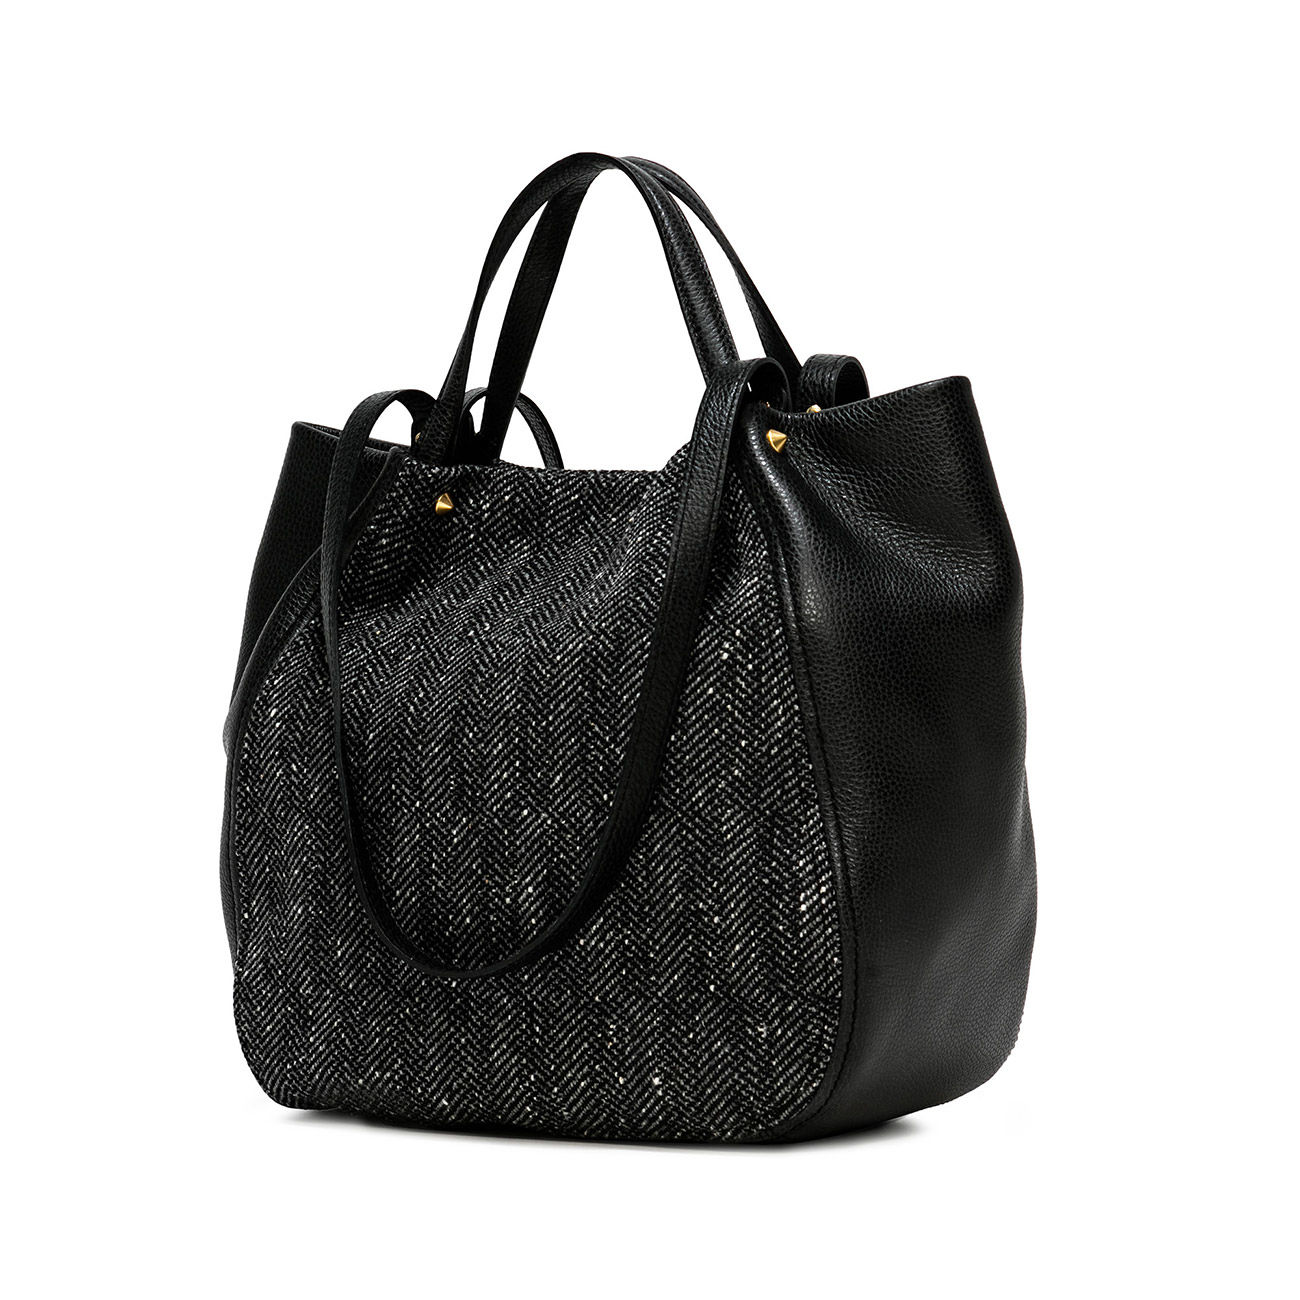 TOTE BAG IN HAMMERED LEATHER Woman Leather 2007351131603